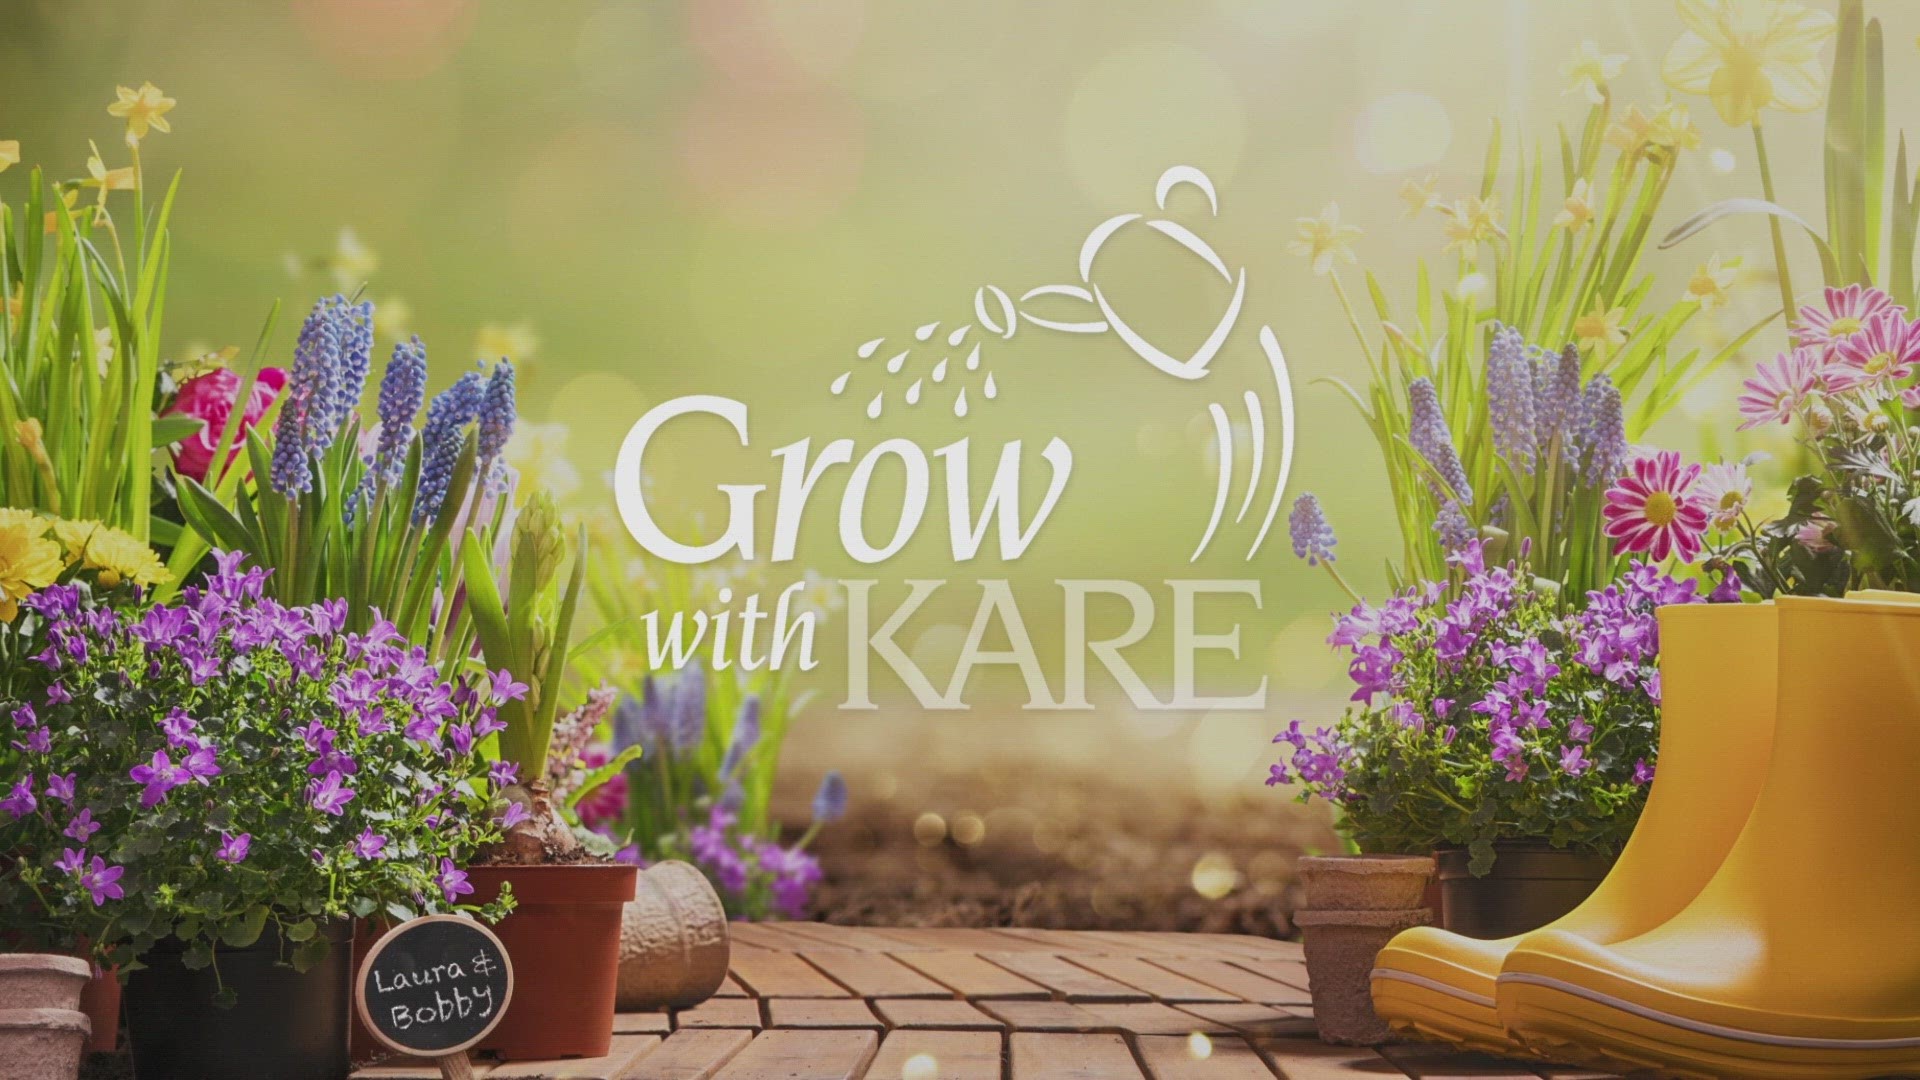 As the weather gets warmer, here are some tips for starting your garden from Grow with KARE.